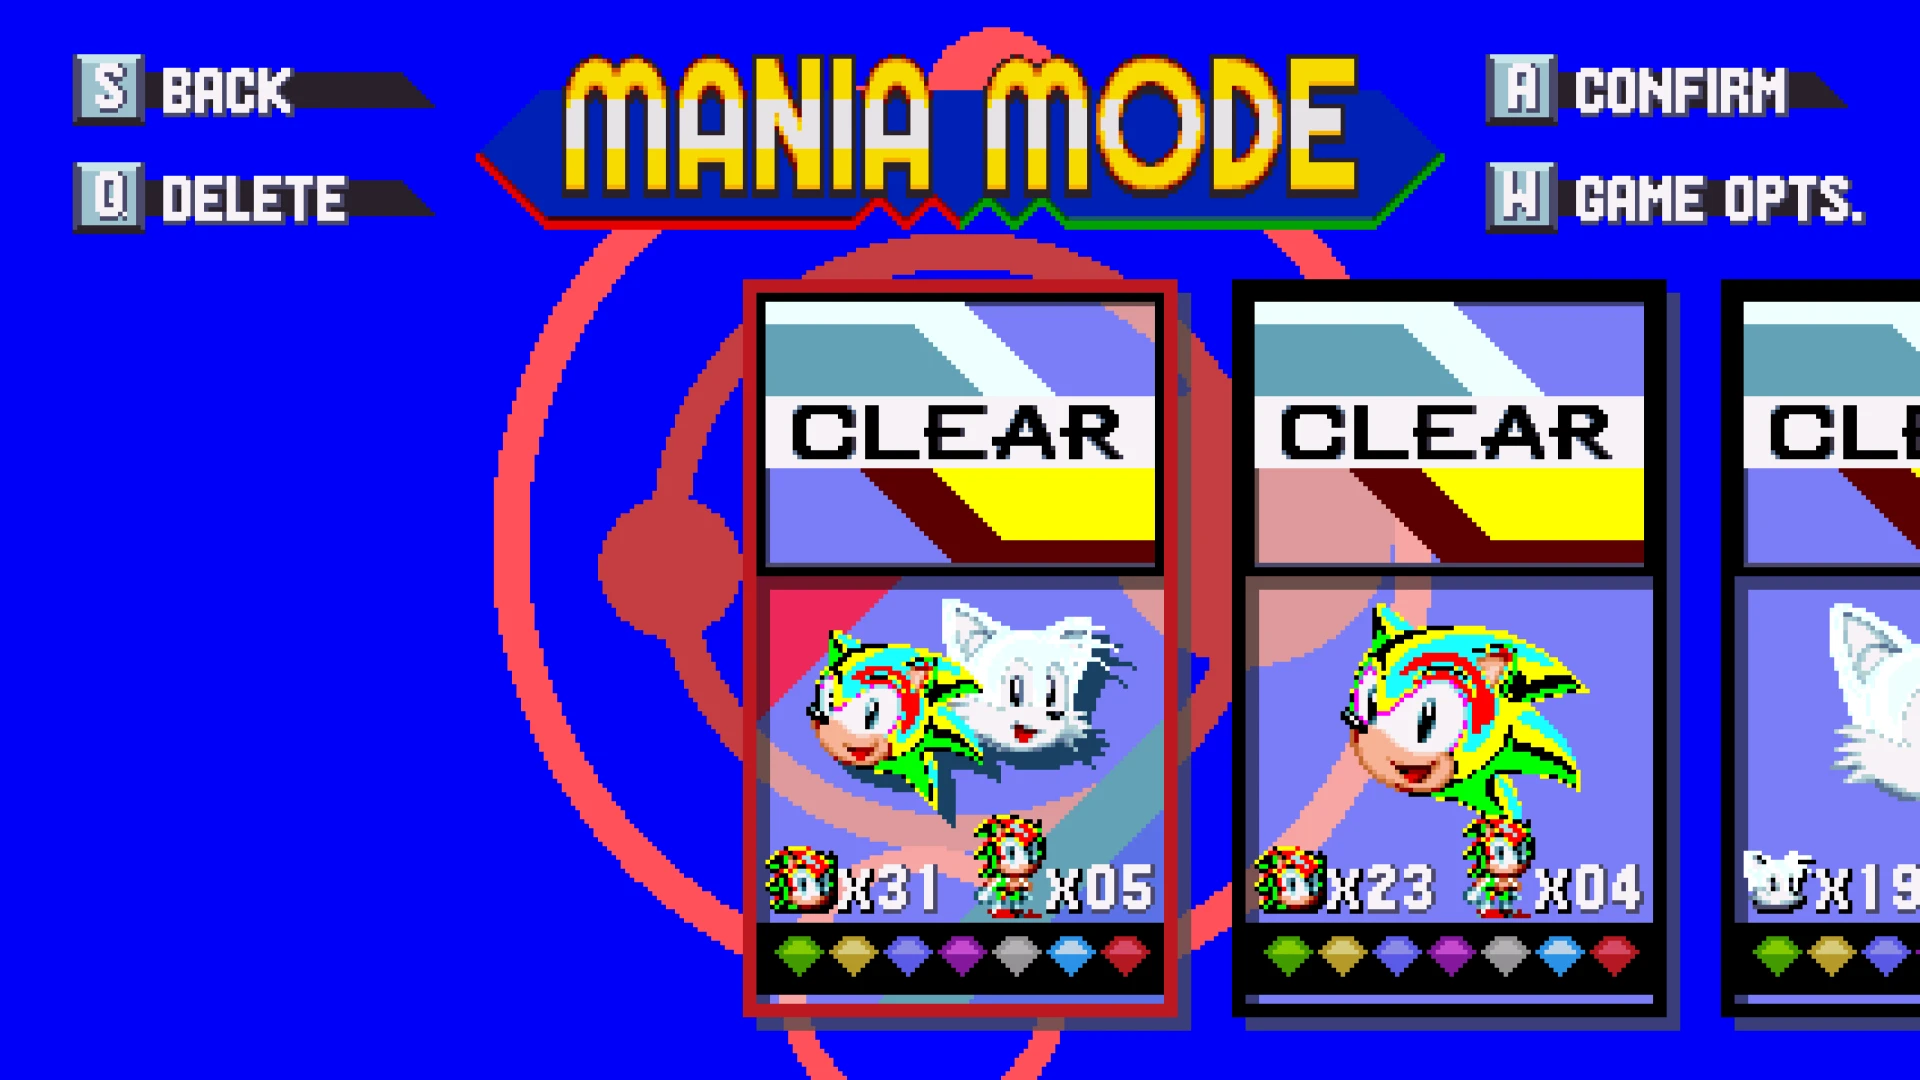 Mods at Sonic Mania Nexus - Mods and Community